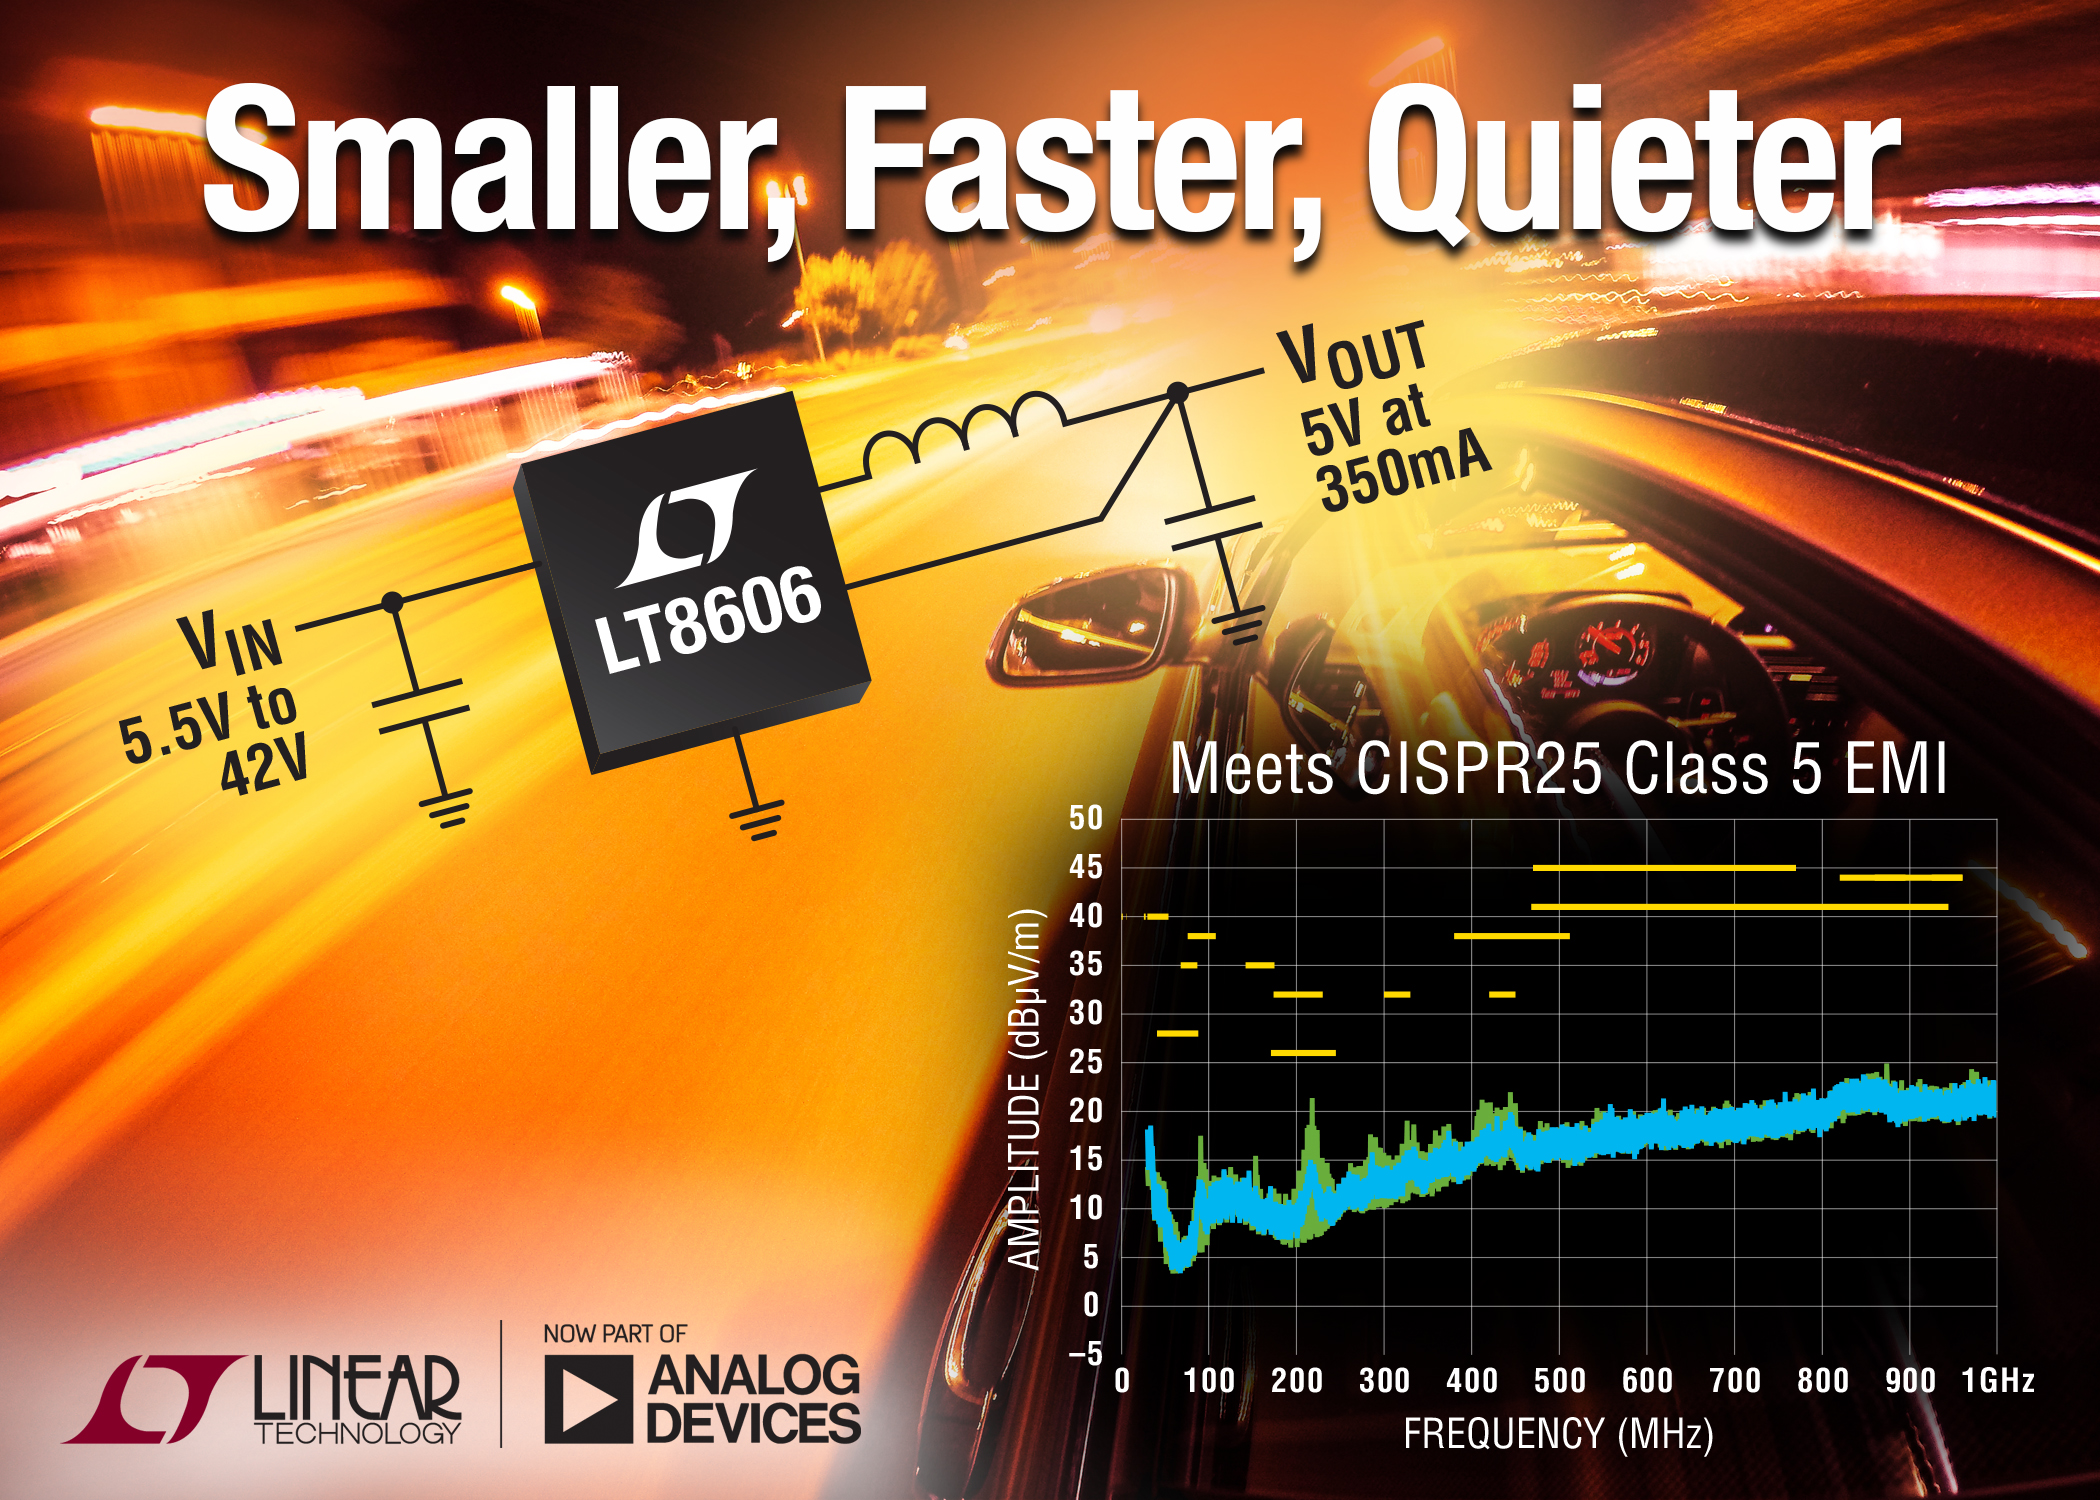 DC/DC Converter Delivers 92% Efficiency at 2MHz & Operates from 3.0V to 42V Inputs